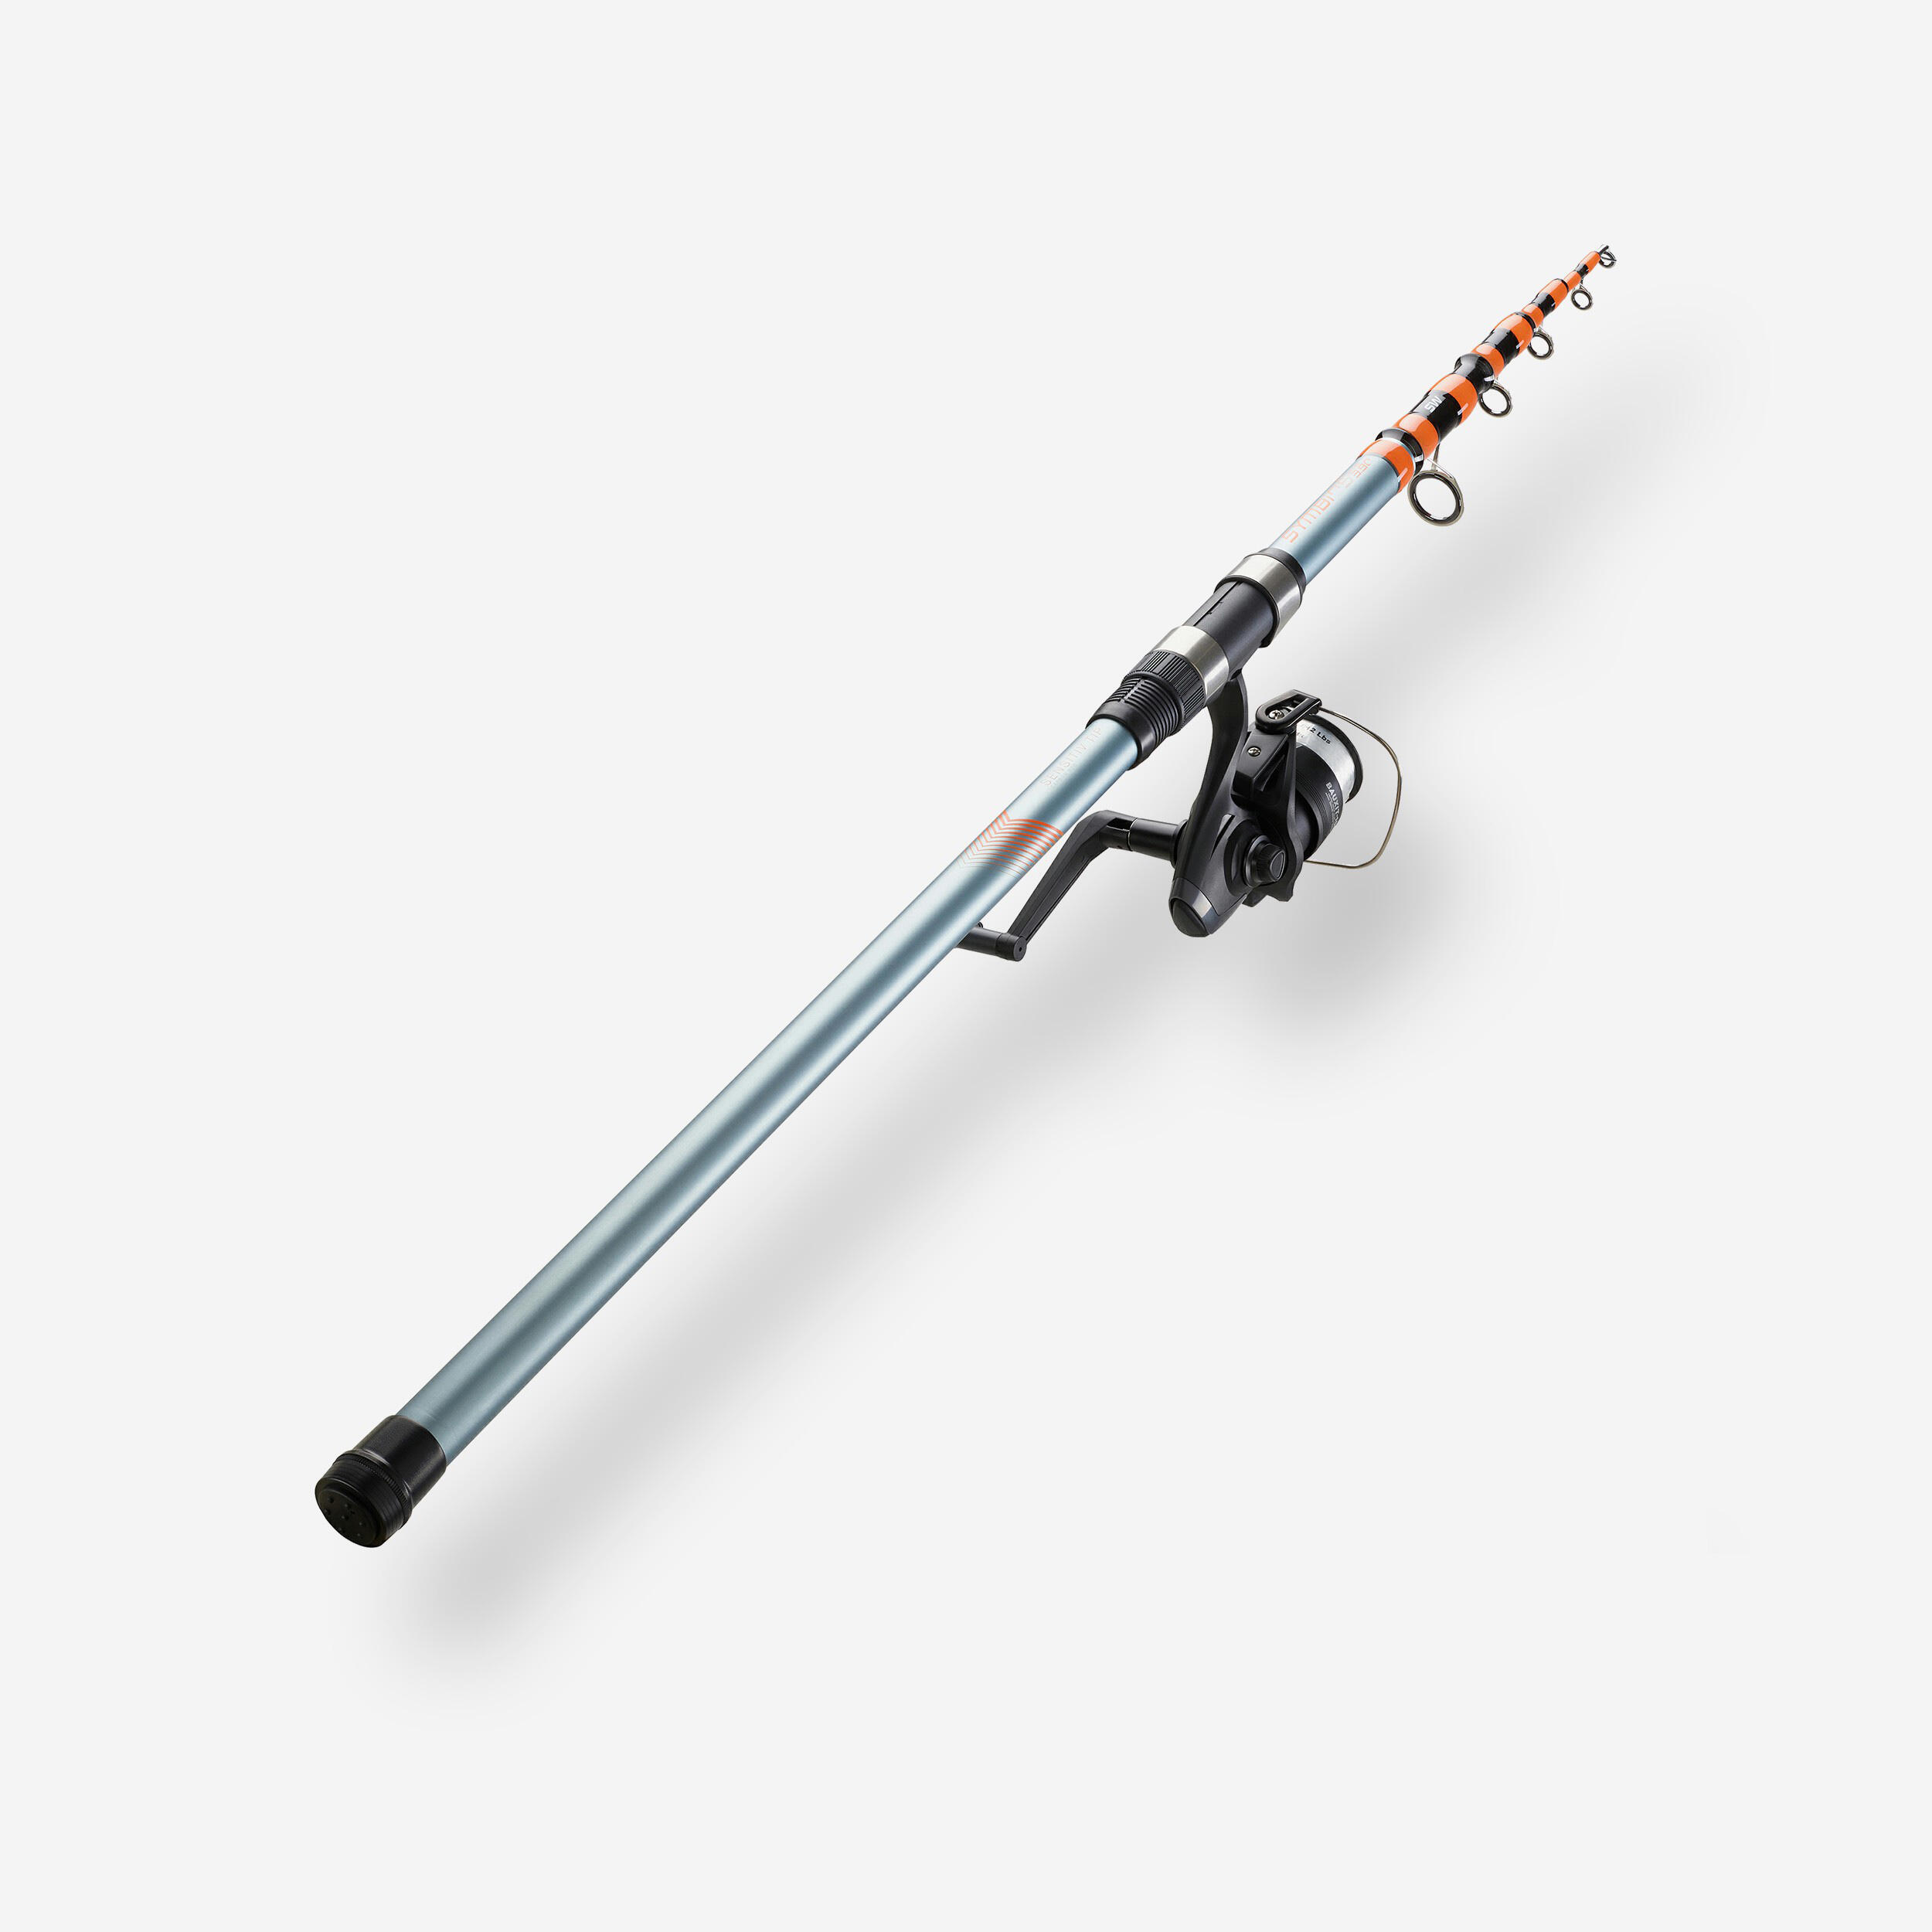 Fishing surfcasting rod and reel combo SYMBIOS LIGHT-100 390 80